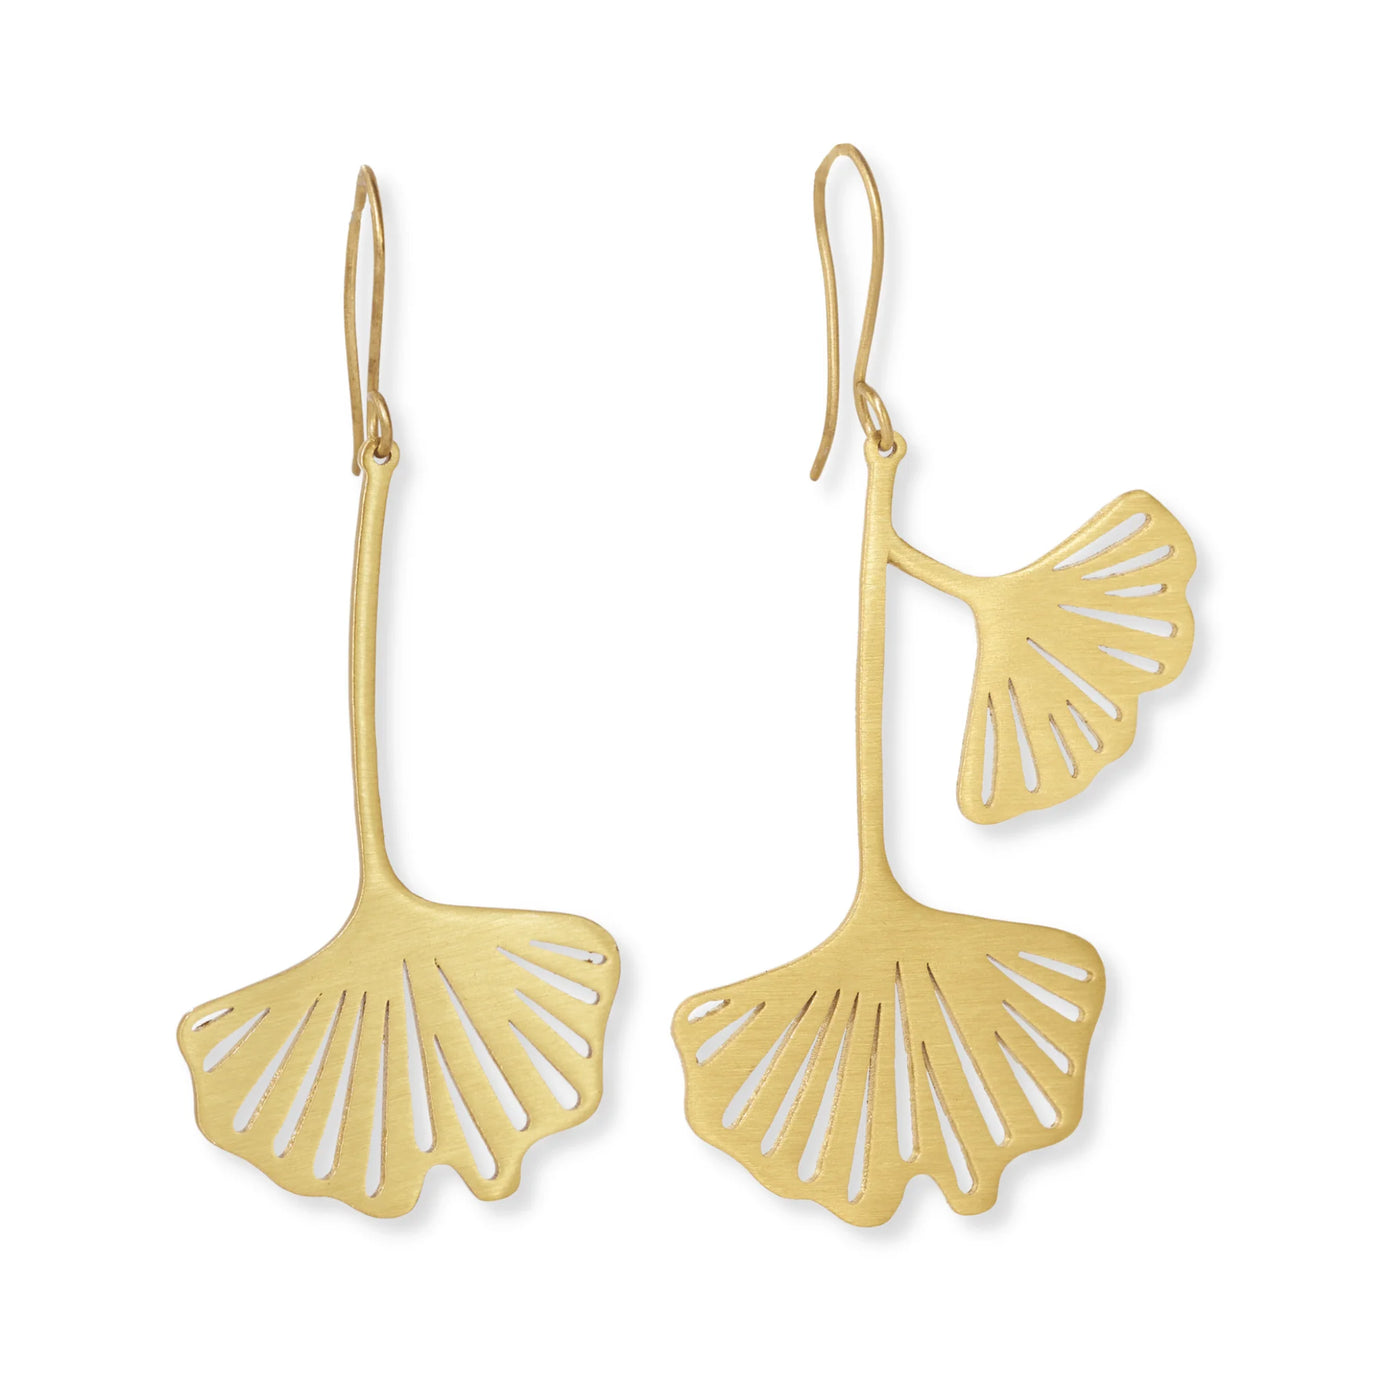 Amelia Ginko Leaf Earrings over white background front and side view.